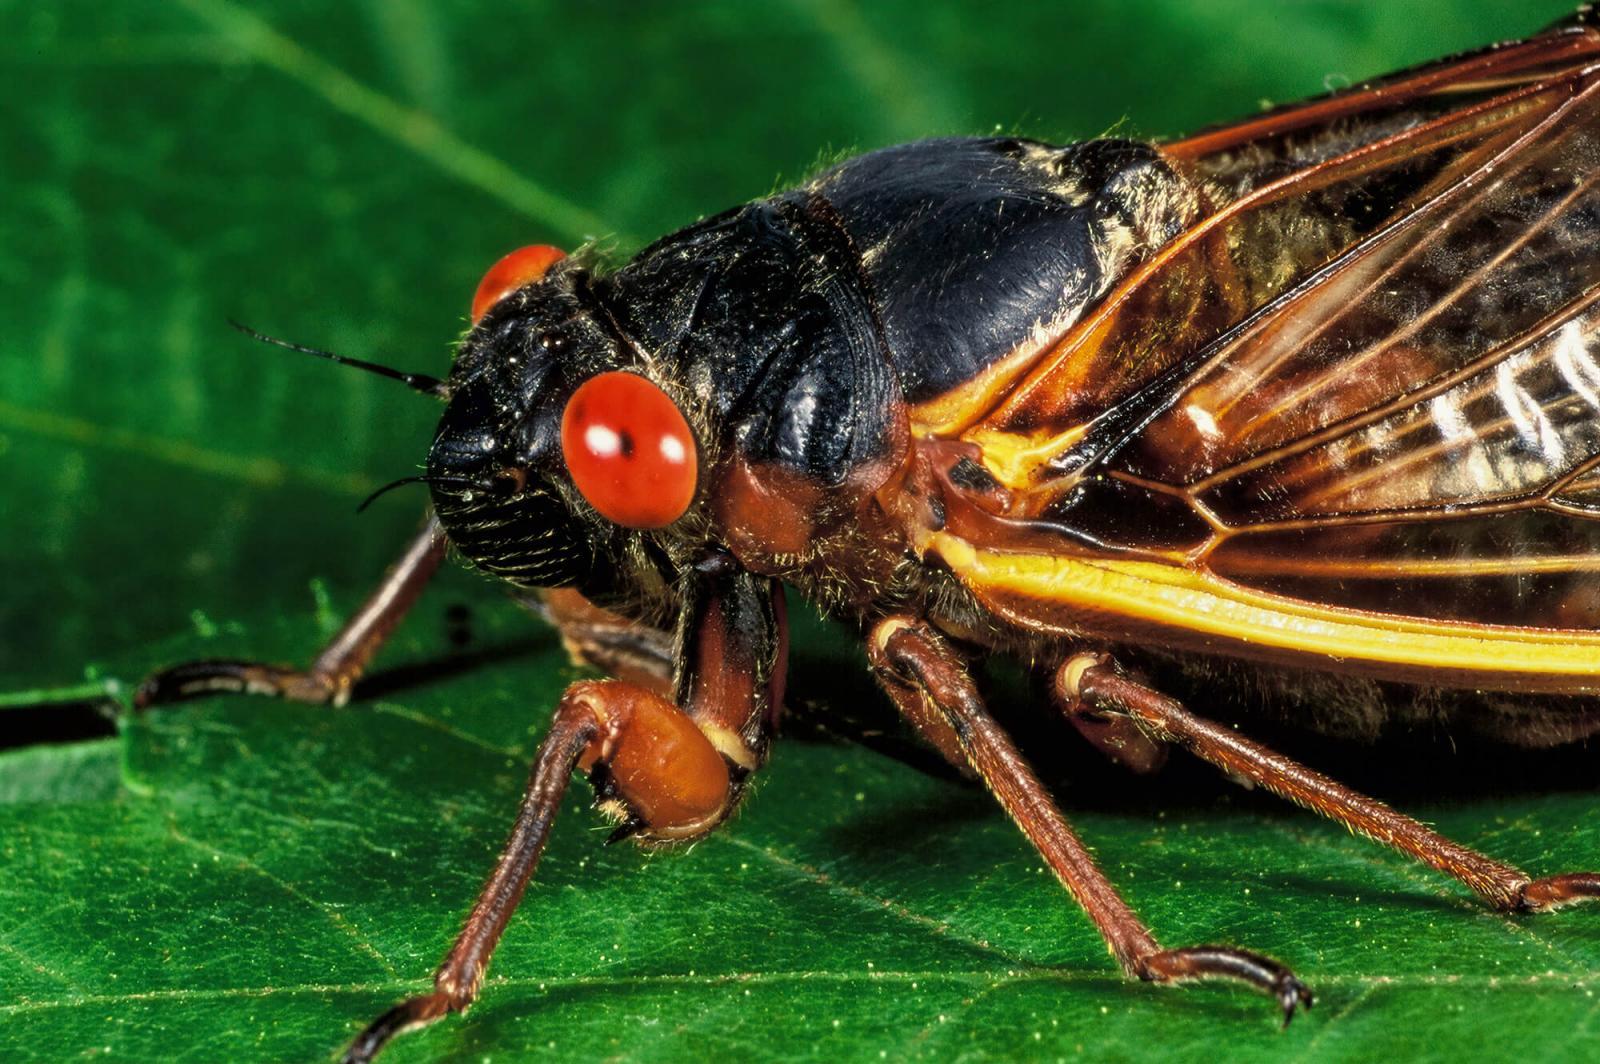 The cicadas are coming — here’s what you need to know